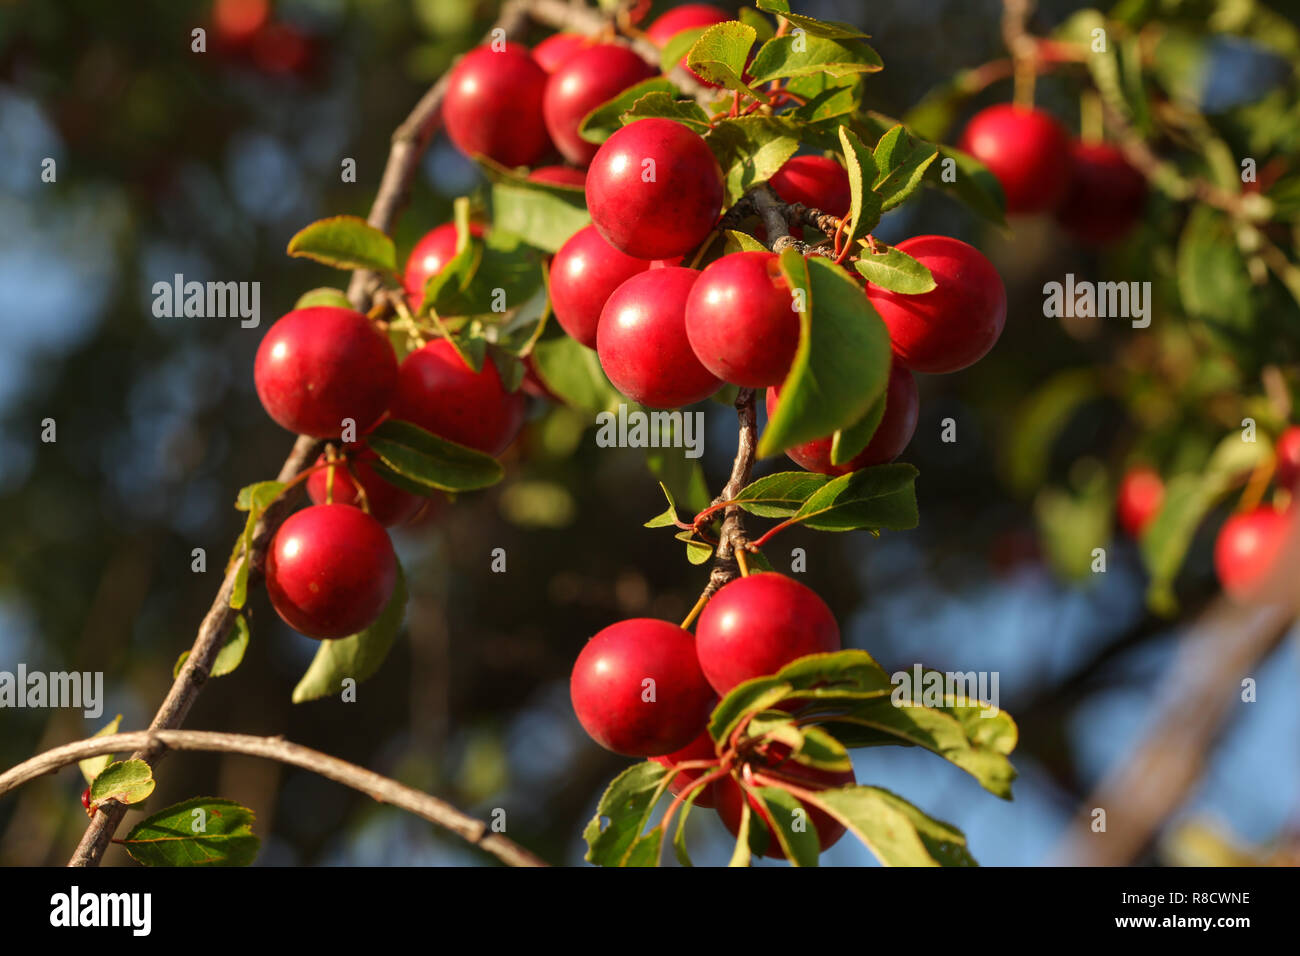 Red Mirabelle Plum / Prune (Prunus domestica subsp. syriaca) growing on tree branches, lit by afternoon sun. Stock Photo